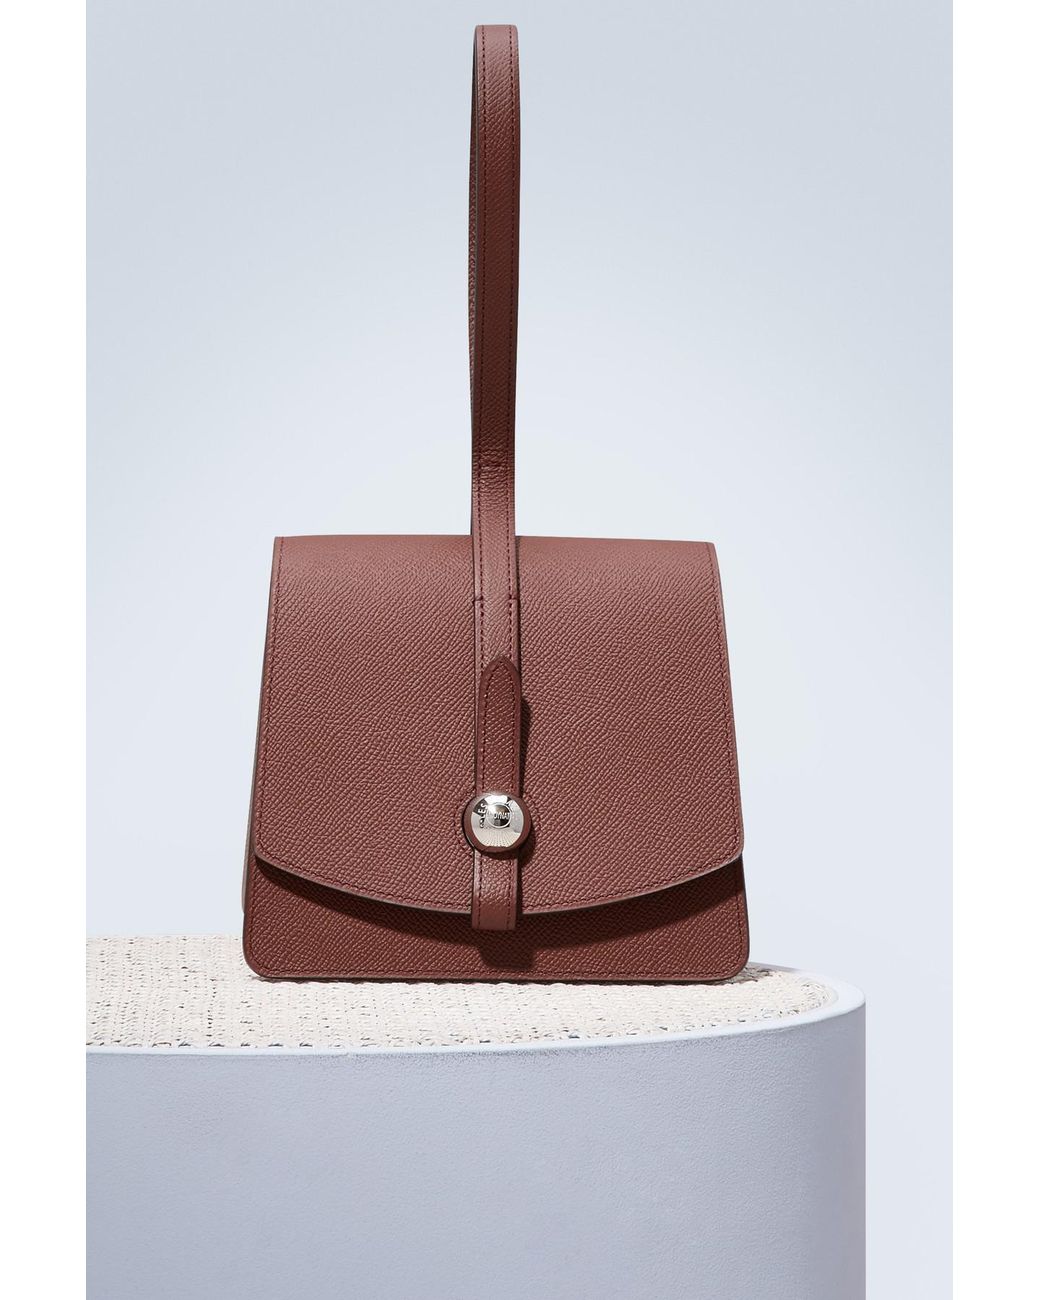 Moynat's New Trinket Pouch Also Makes A Great Bag Charm - BAGAHOLICBOY